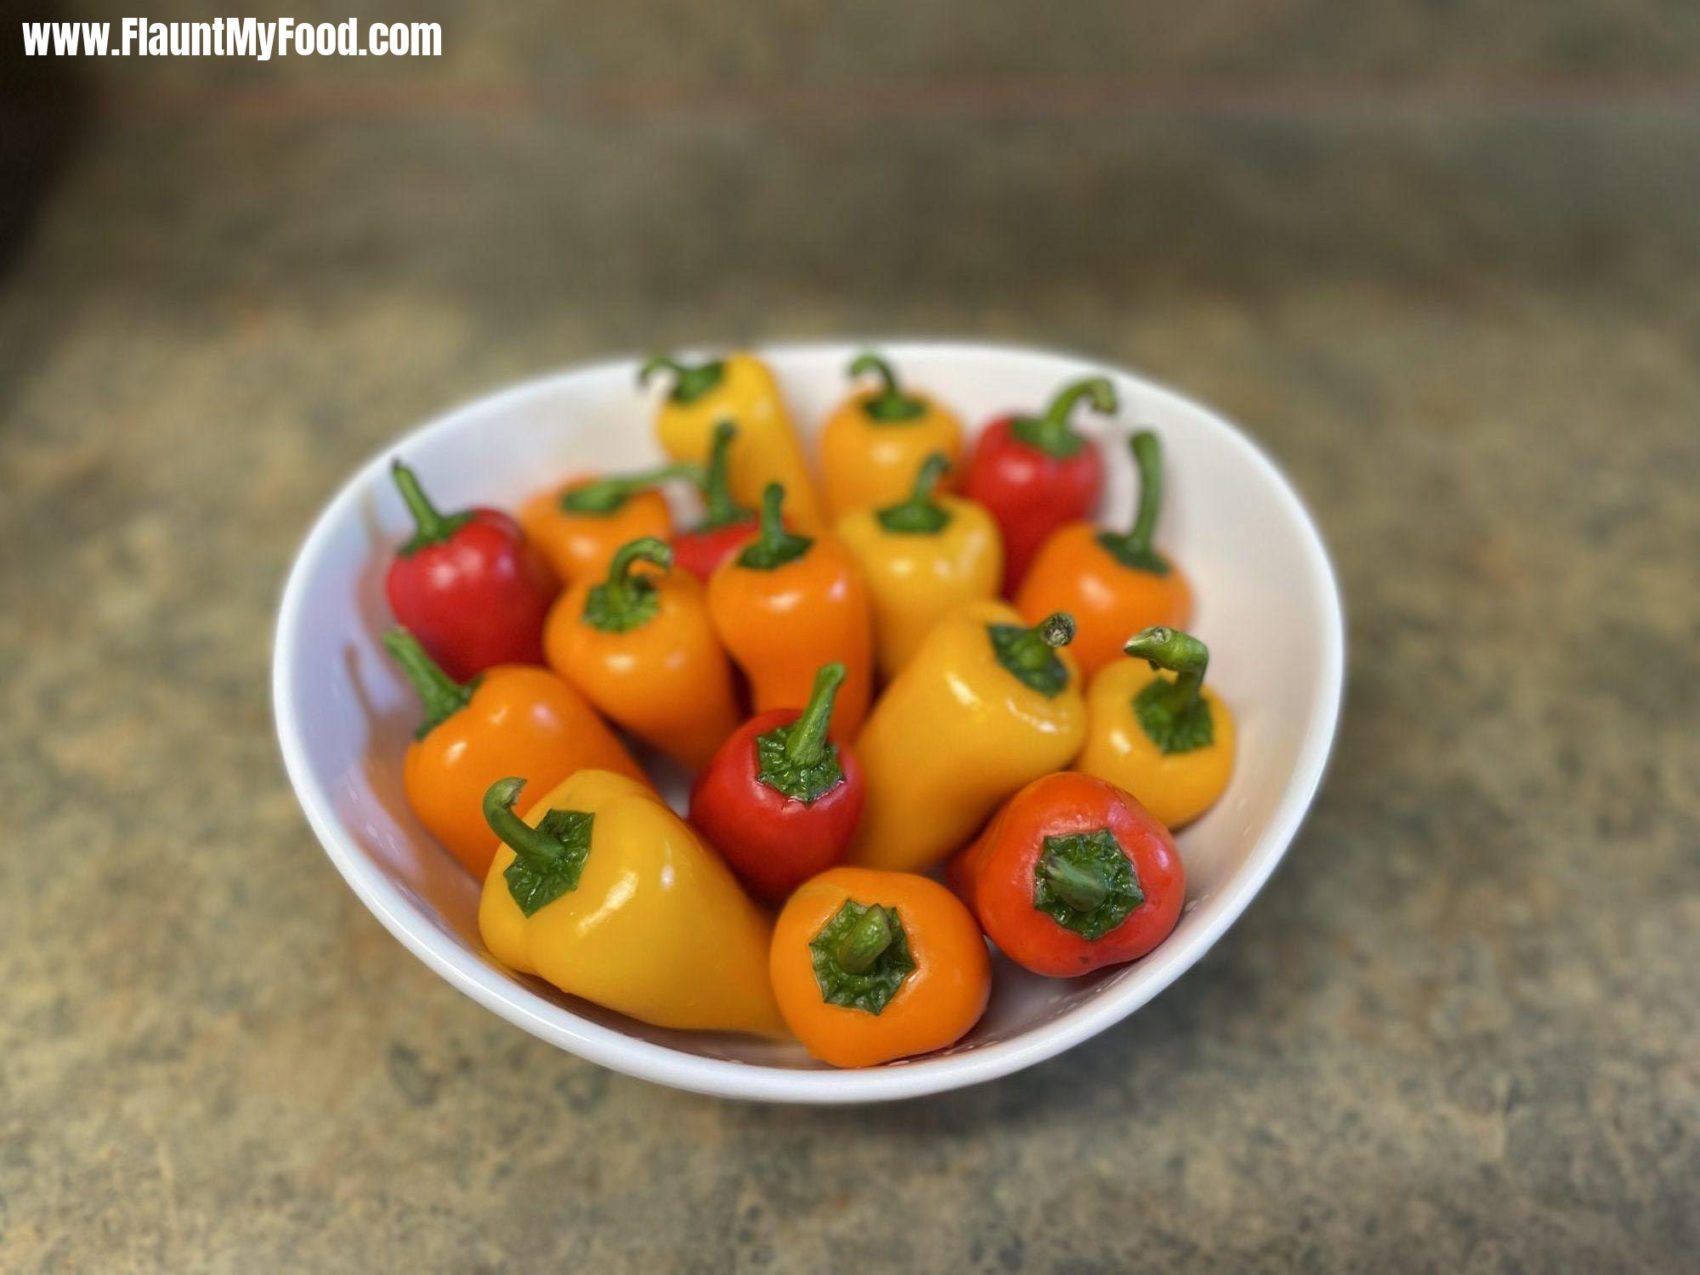 Mini colorful peppers for a great evening healthy treat and snack for a togetherMini colorful peppers for a great evening healthy treat and snack for a together